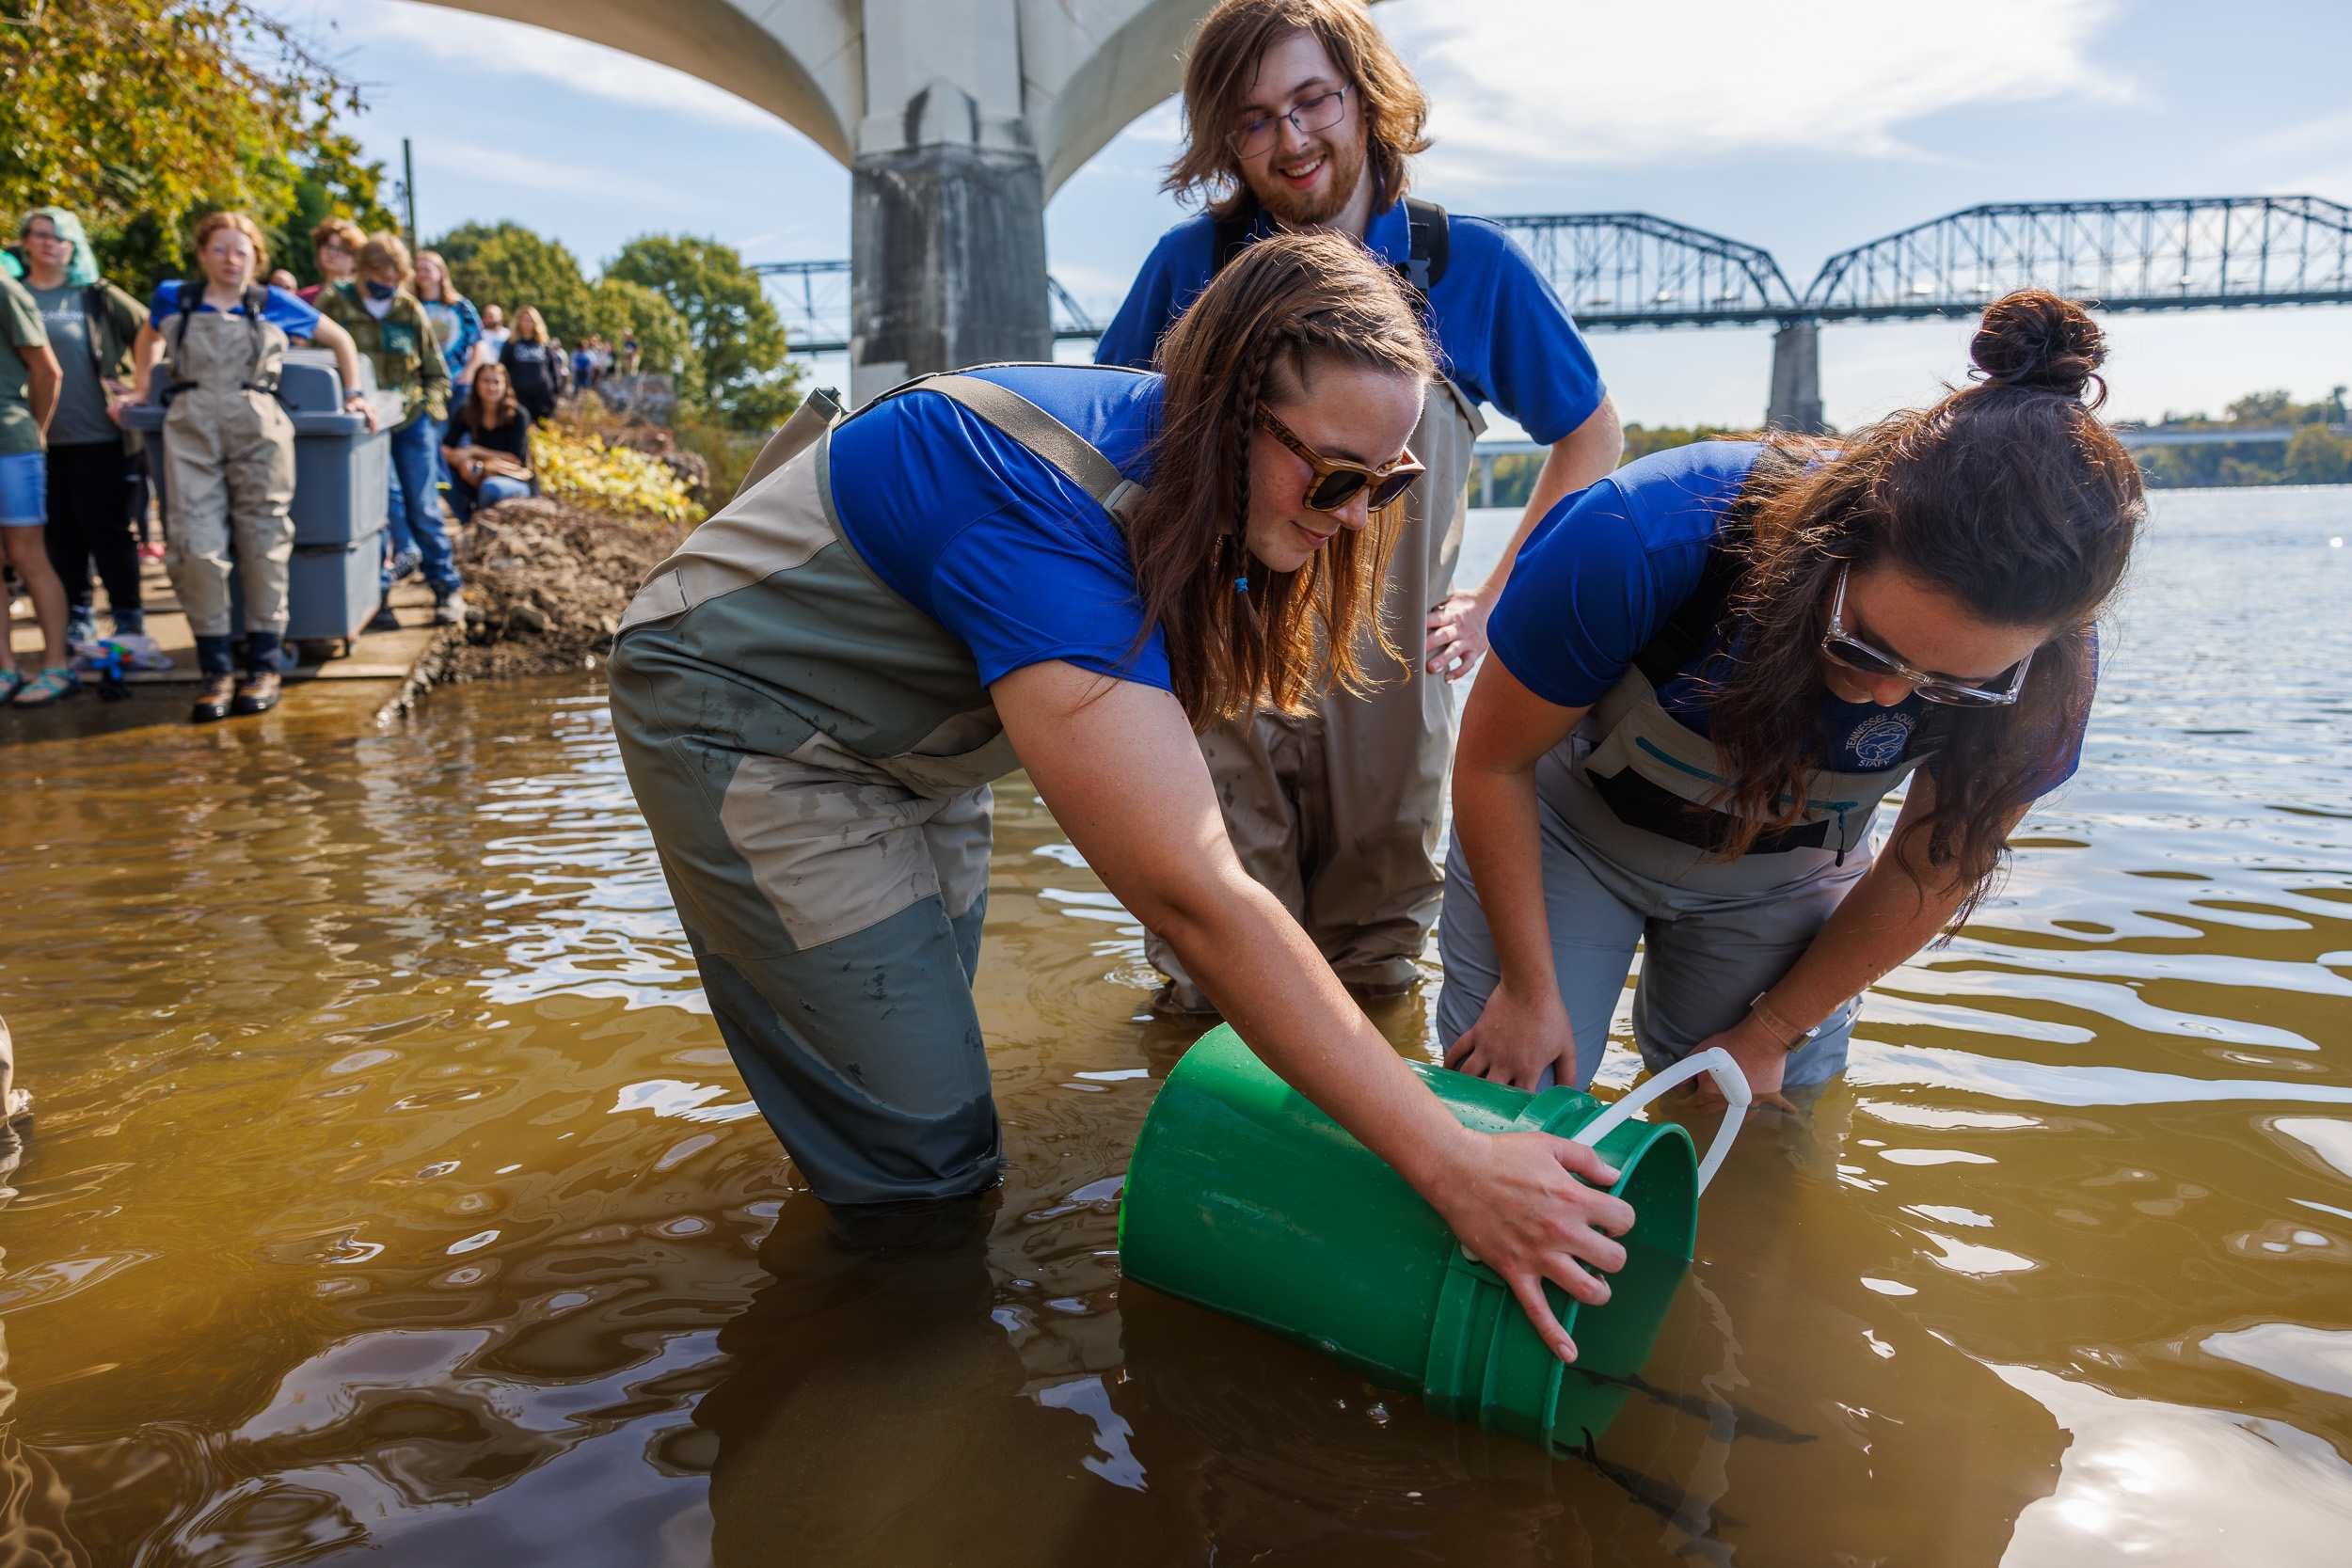 People release lake sturgeon from a bucket into a river